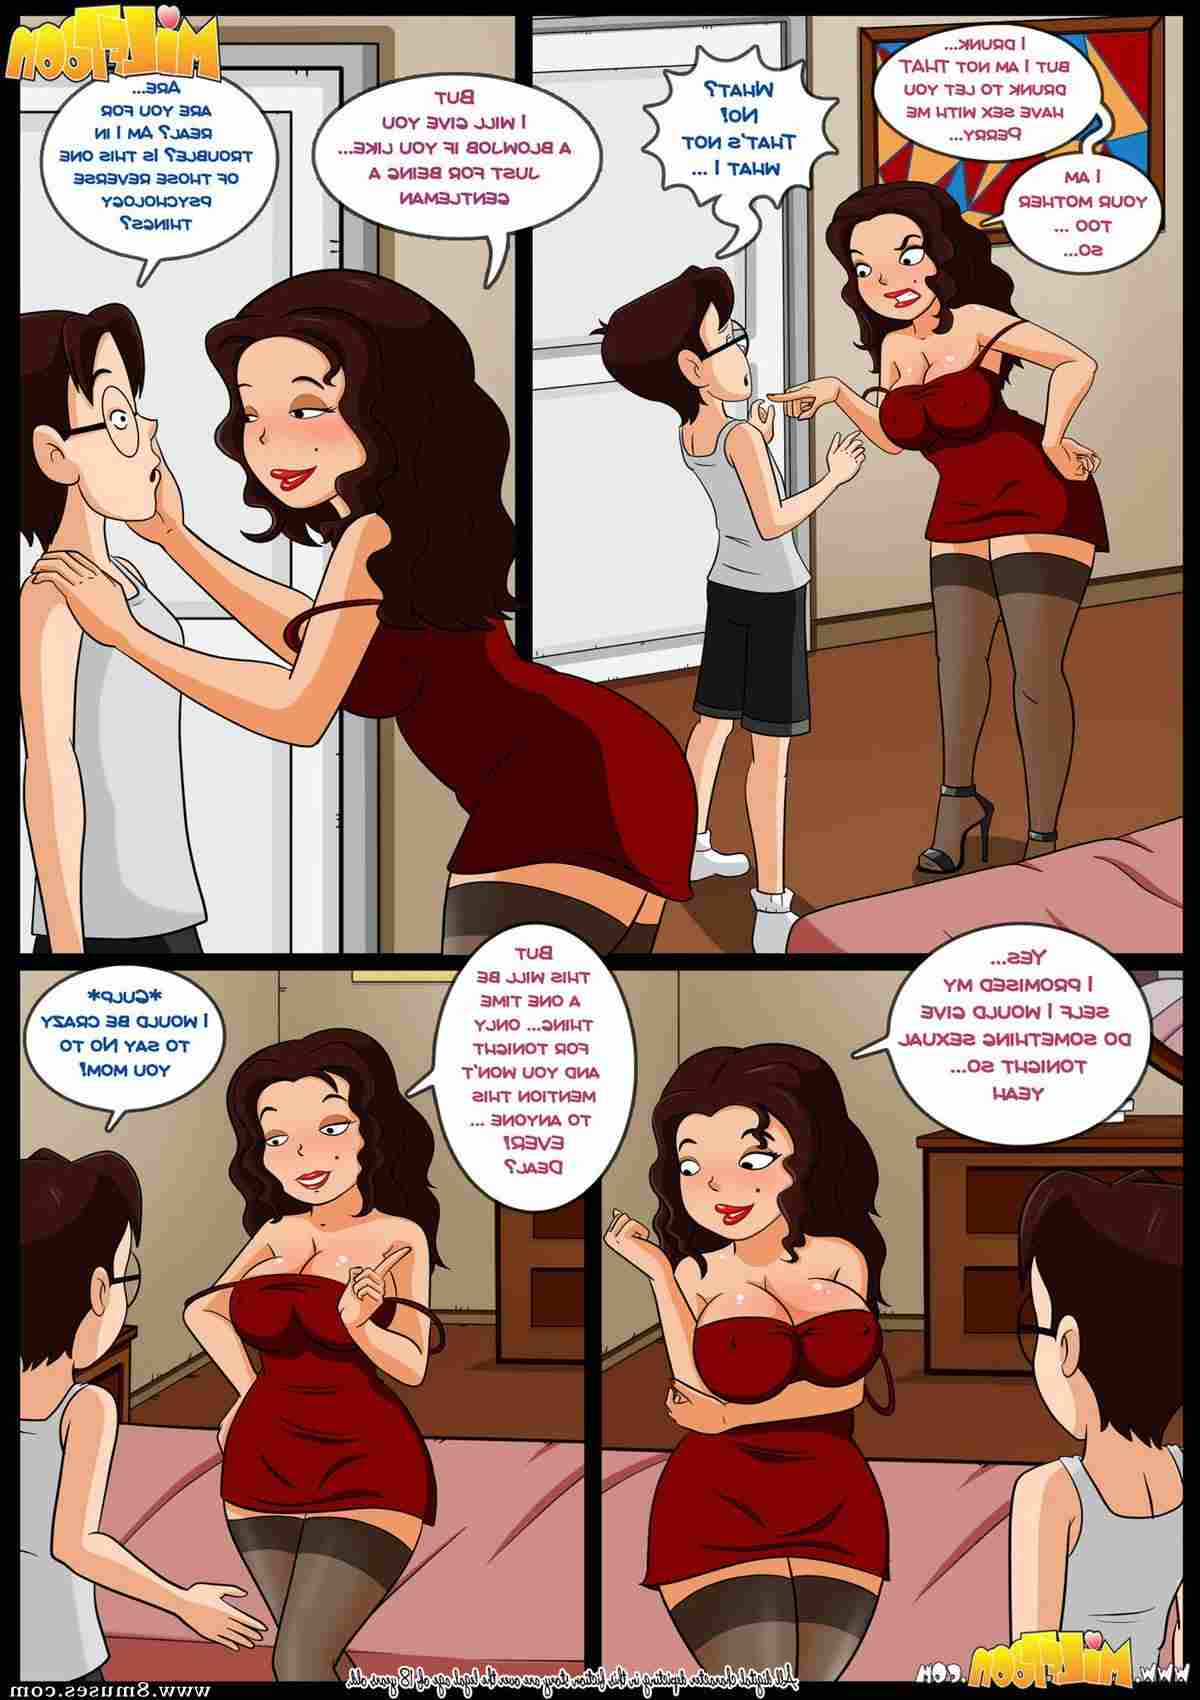 MilfToon-Comics/Wine-and-Dine Wine_and_Dine__8muses_-_Sex_and_Porn_Comics_12.jpg